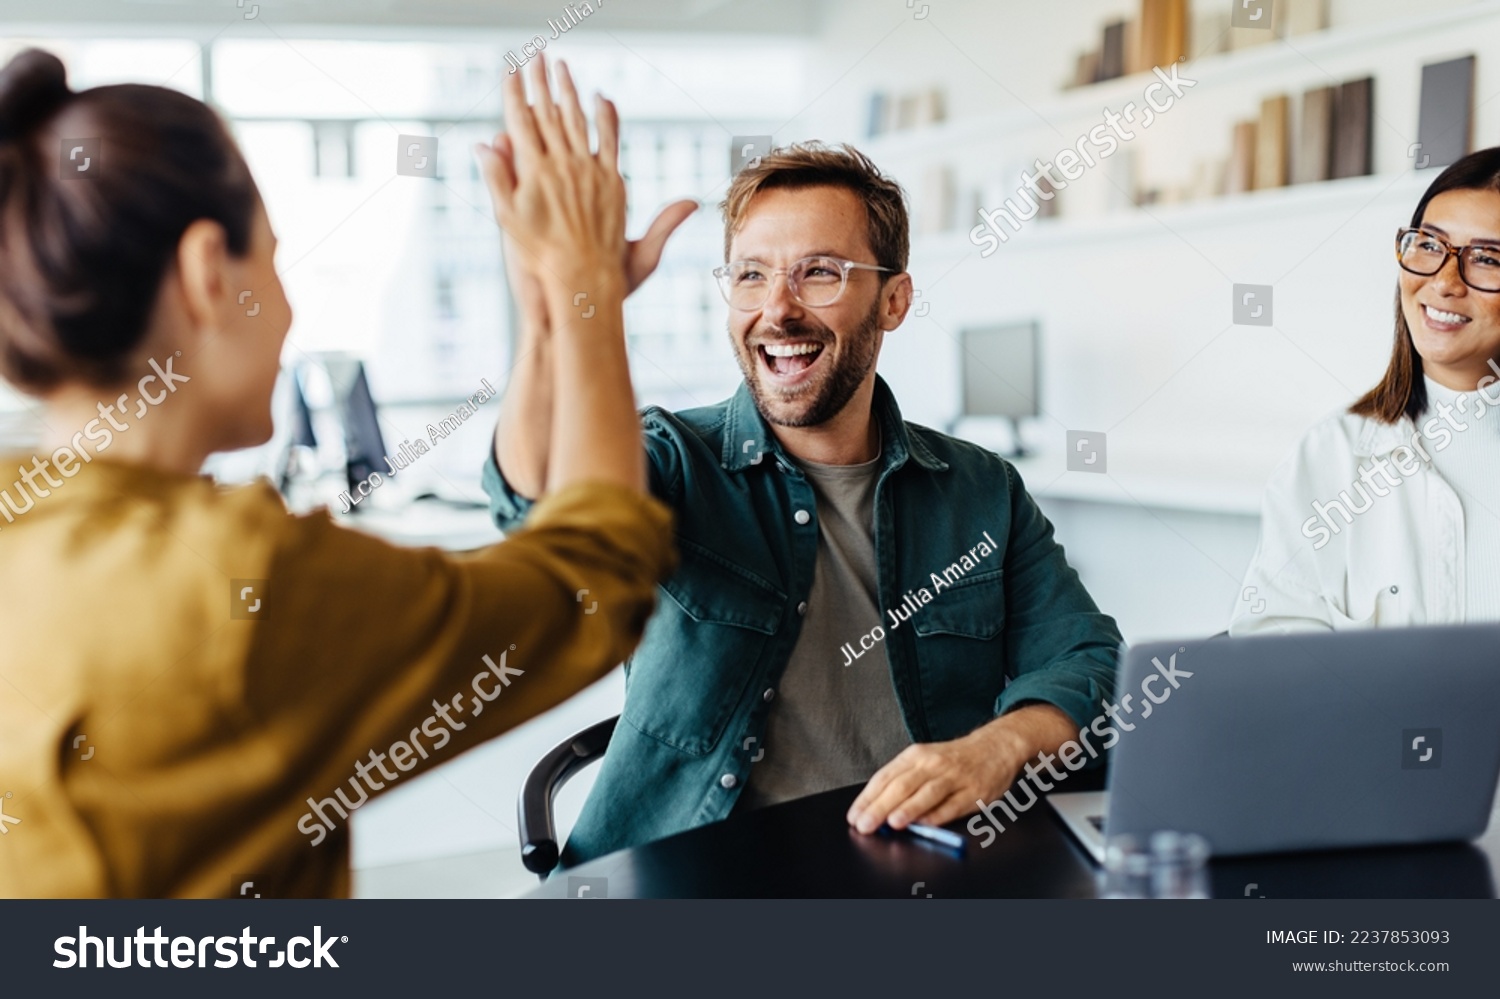 Successful business people giving each other a high five in a meeting. Two young business professionals celebrating teamwork in an office. #2237853093